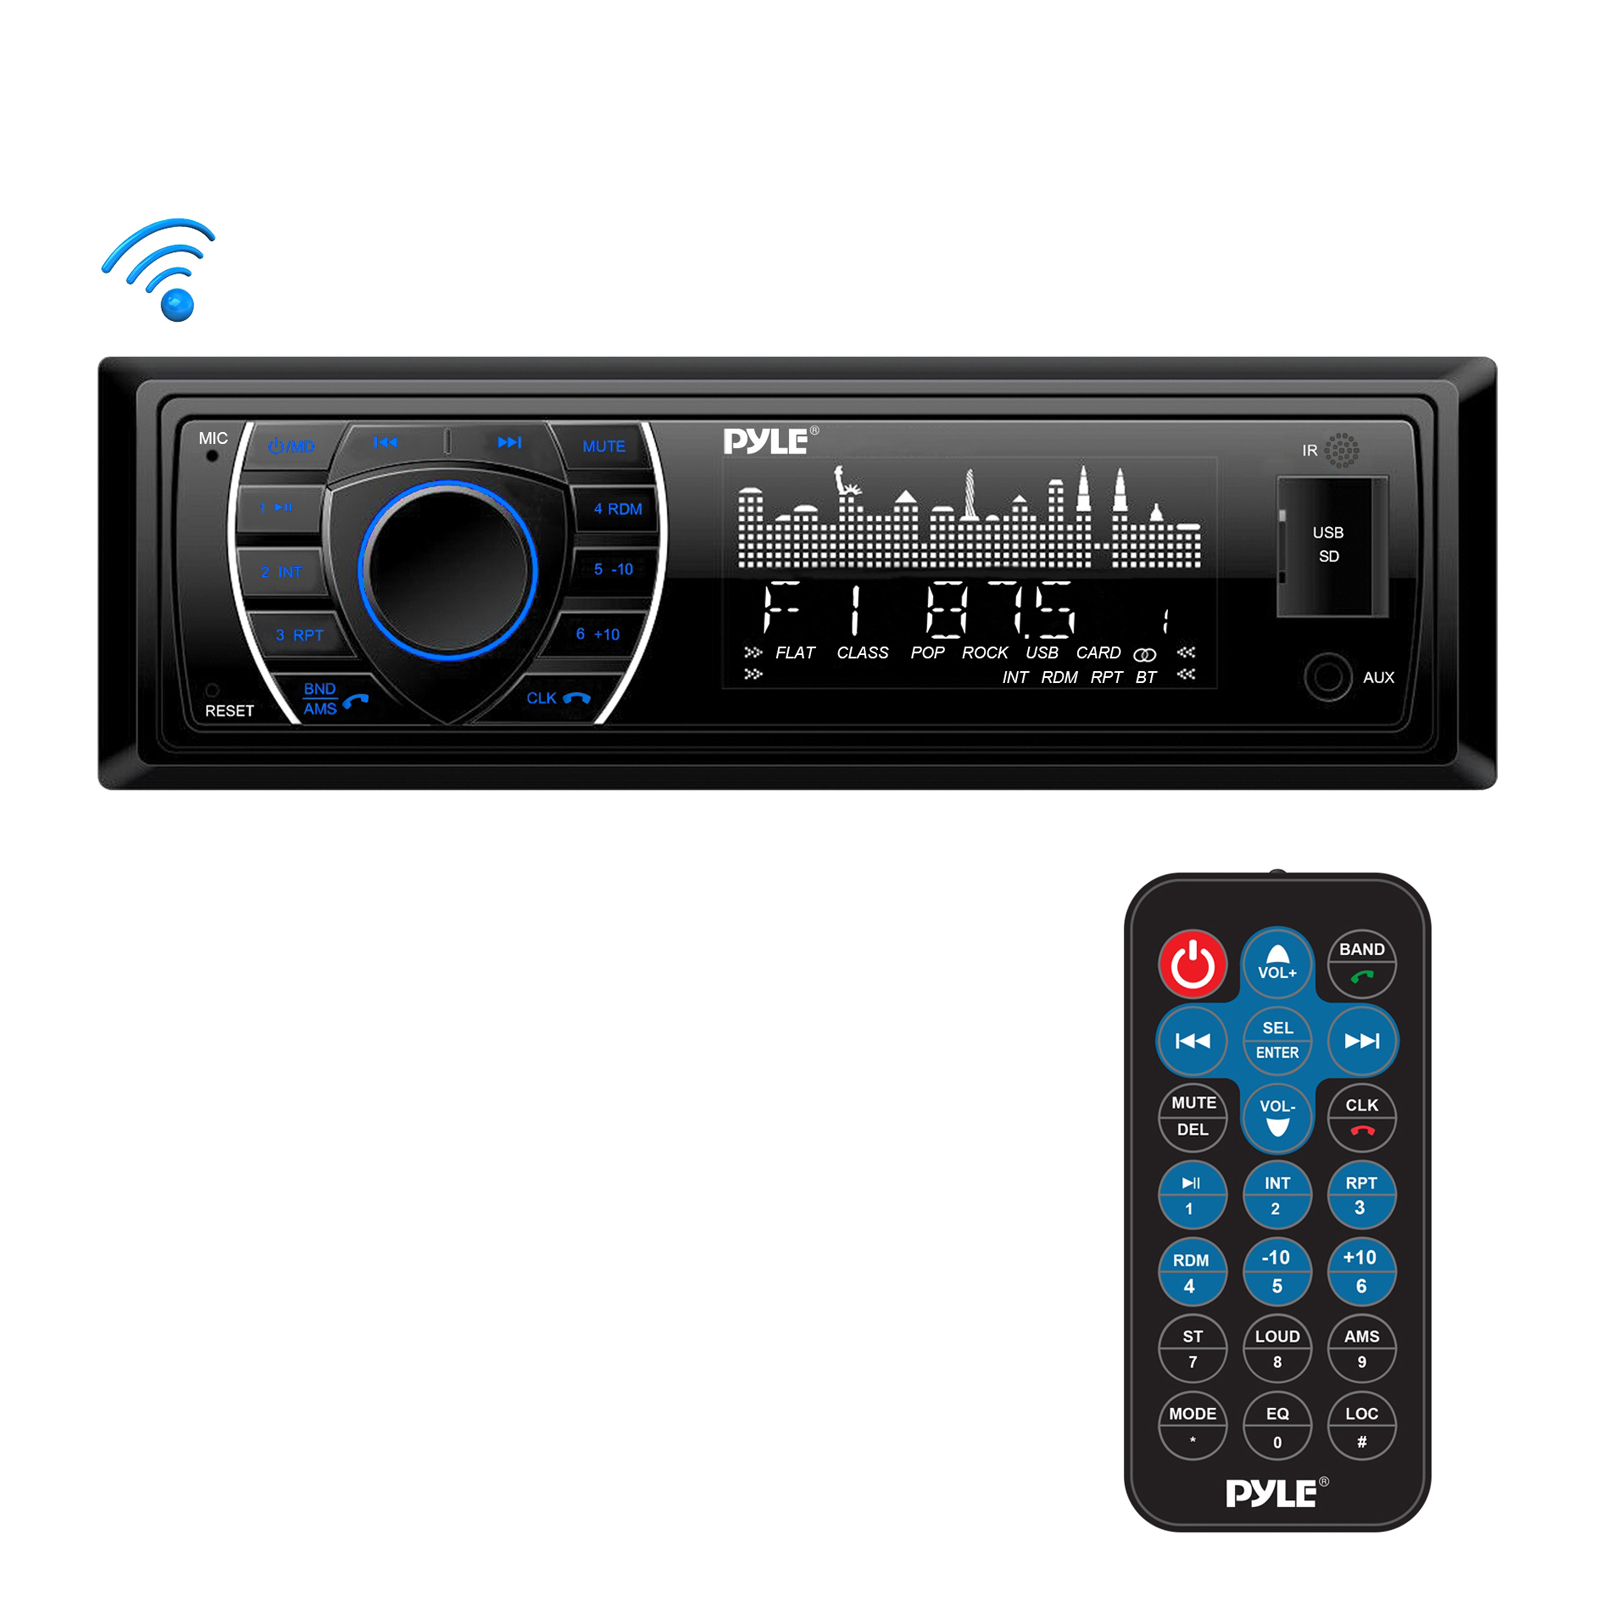 BT Marine Receiver Stereo, Hands-Free Calling, cord free Streaming, MP3/USB/SD Readers, AM/FM Radio (Black) - image 1 of 5